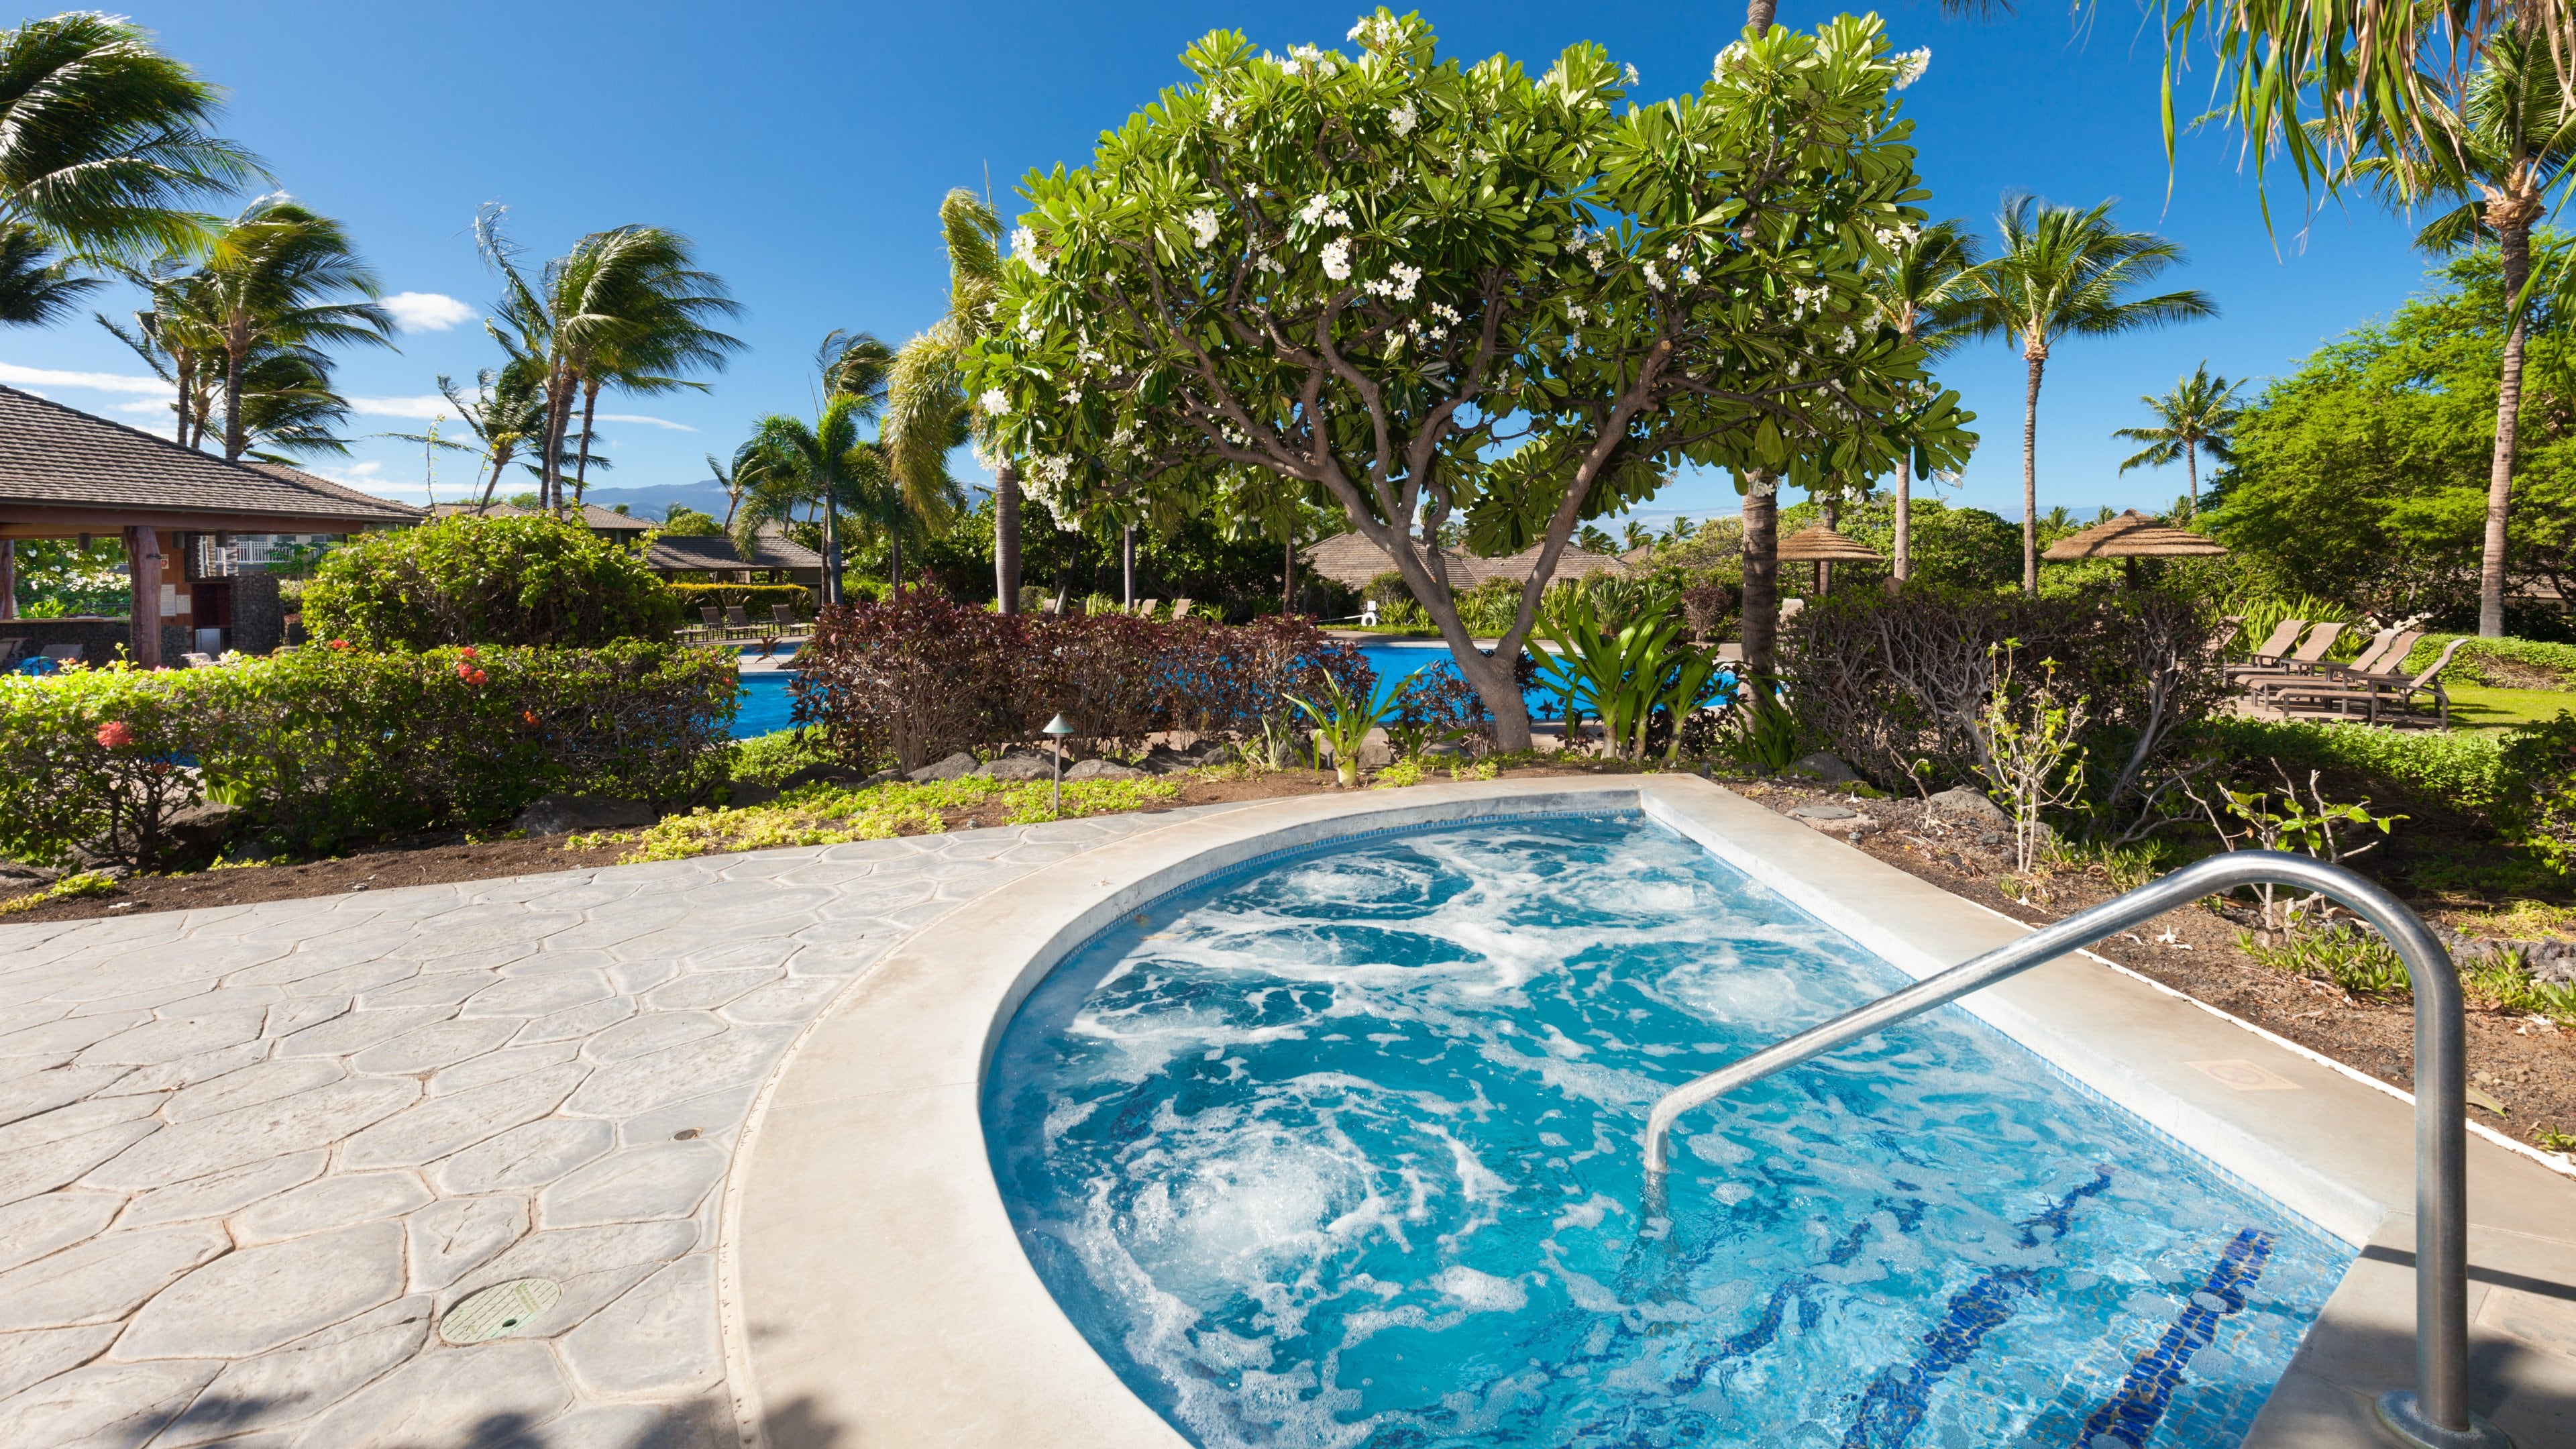 Enjoy soaking in one of two spas at the Kulalani Recreation Complex